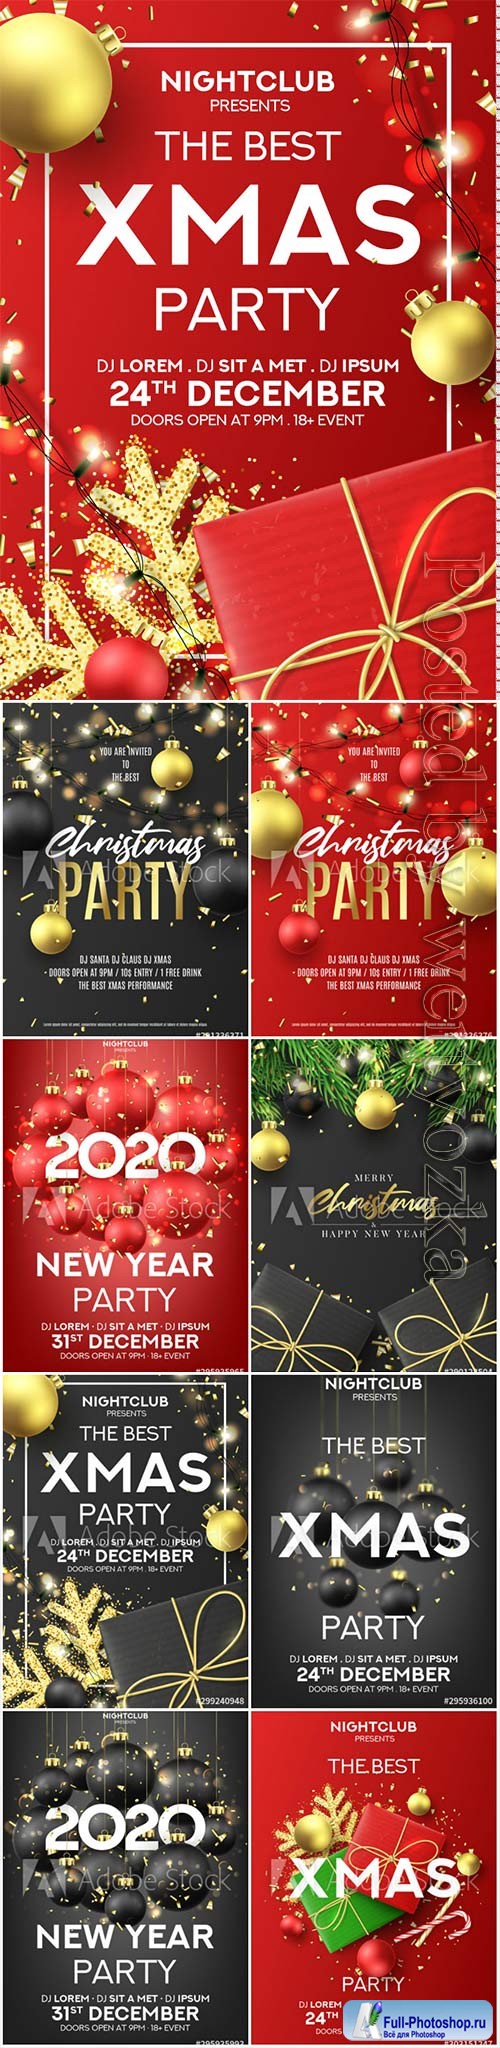 Happy New Year party poster, holiday vector